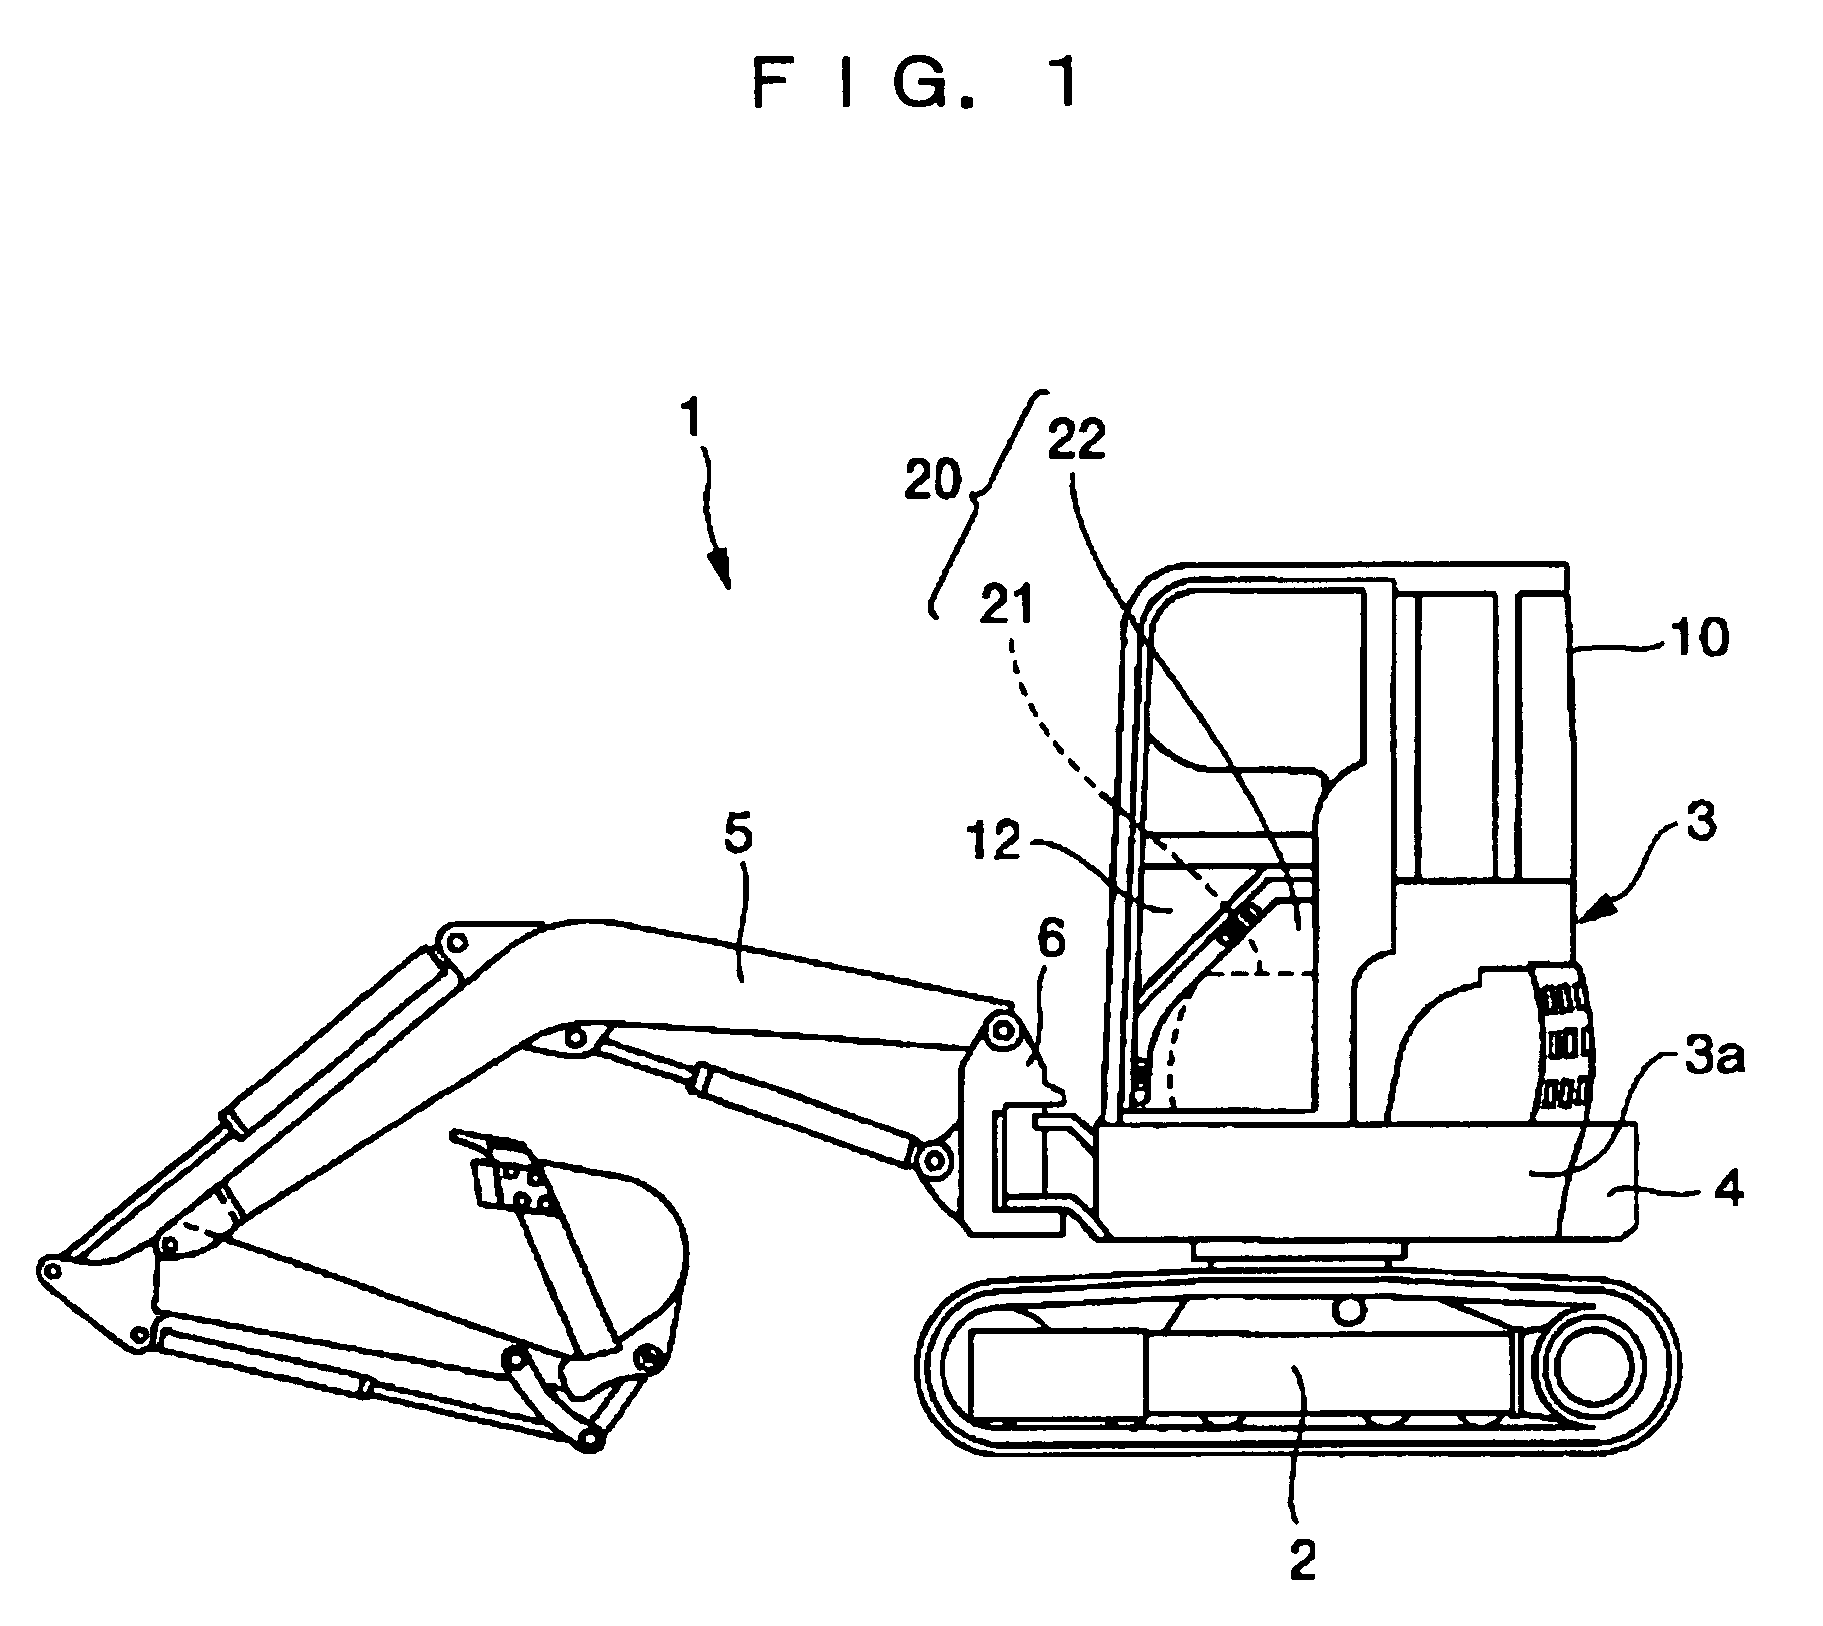 Air conditioning apparatus for hydraulic shovel